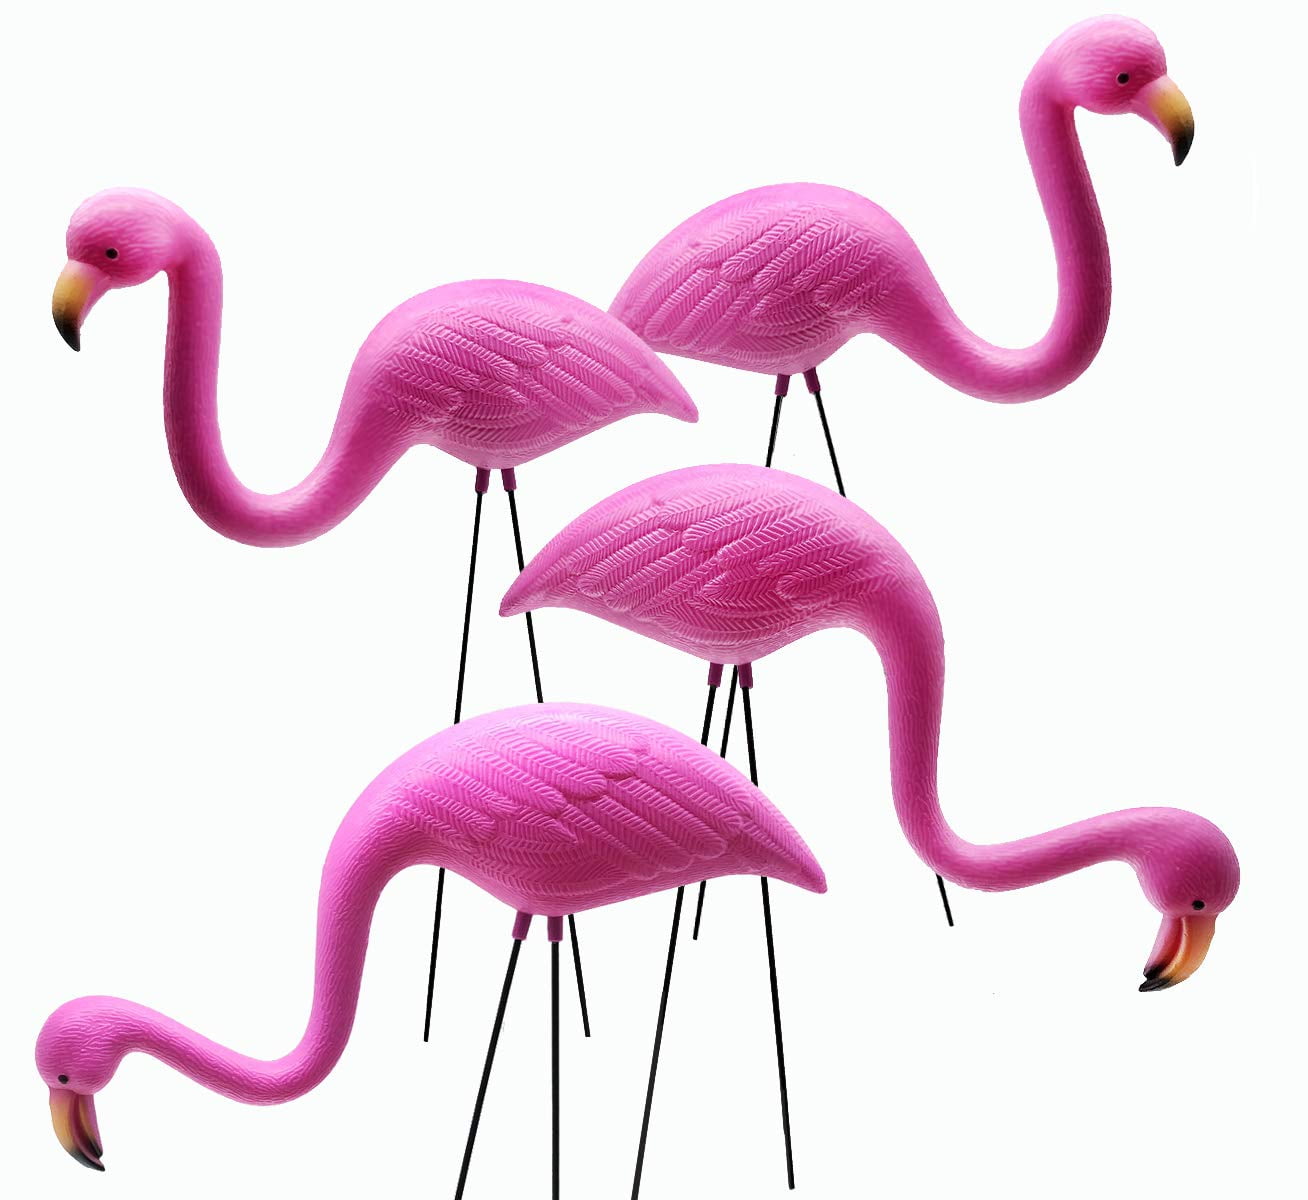 34 Large Bright Pink Flamingo Yard Ornament/Flamingo Lawn Ornaments/ink Flamingo Garden Yard Stakes/Adjustable Feet Length and Gesture GIFTEXPRESS® Pack of 2